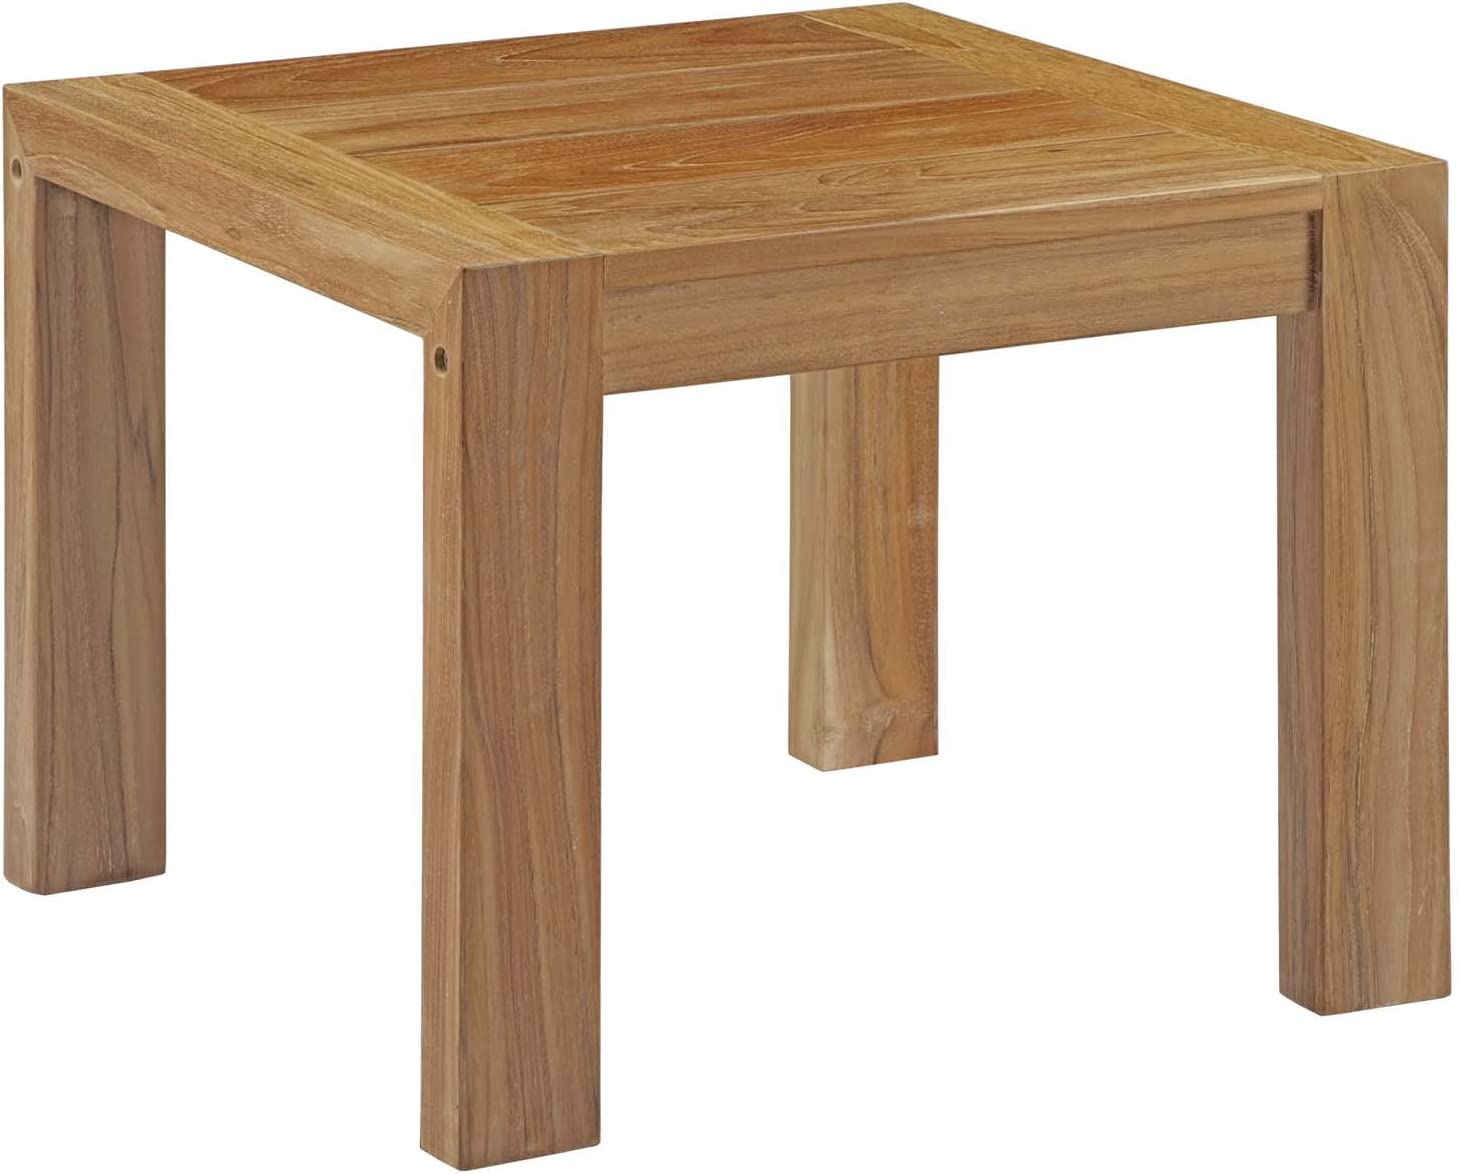 Modway Upland Teak Wood Outdoor Patio Side End Table in Natural